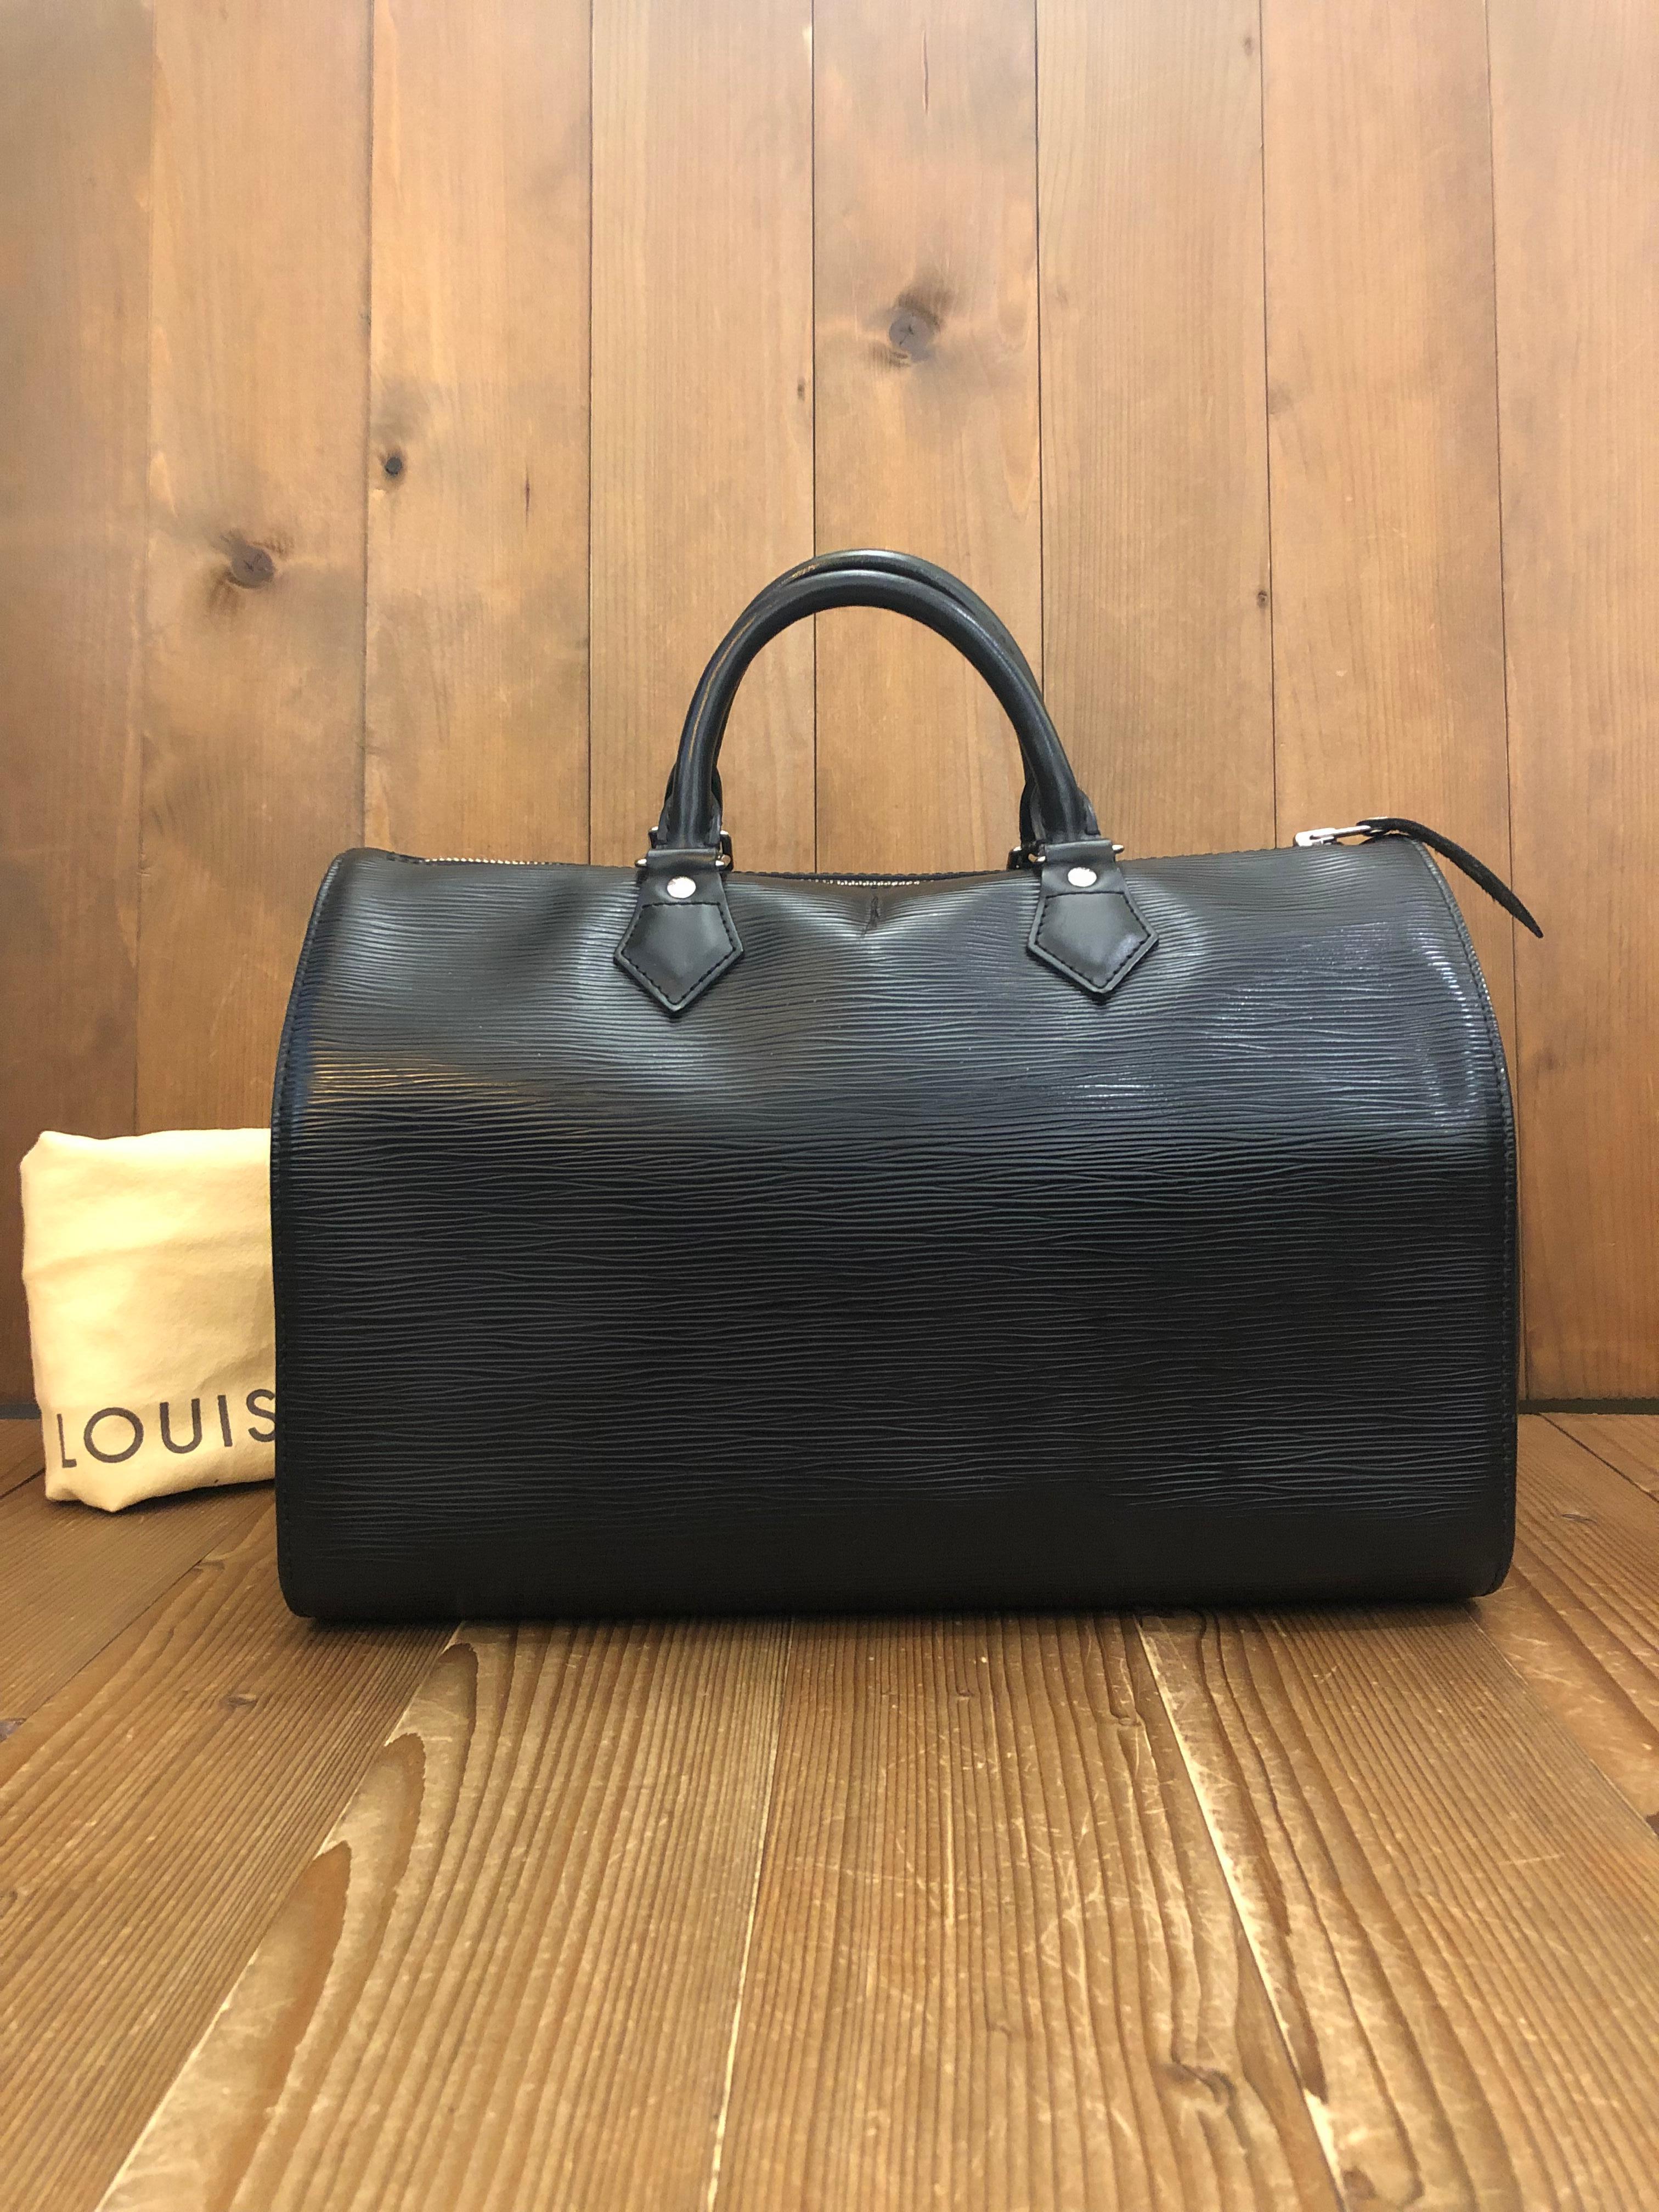 This chic LOUIS VUITTON Speedy 30 boston bag is crafted of Louis Vuitton’s signature Epi leather in black featuring silver hardware. This bag features a side patch pocket and rolled leather handles. Top zipper closure opens to a black fabric